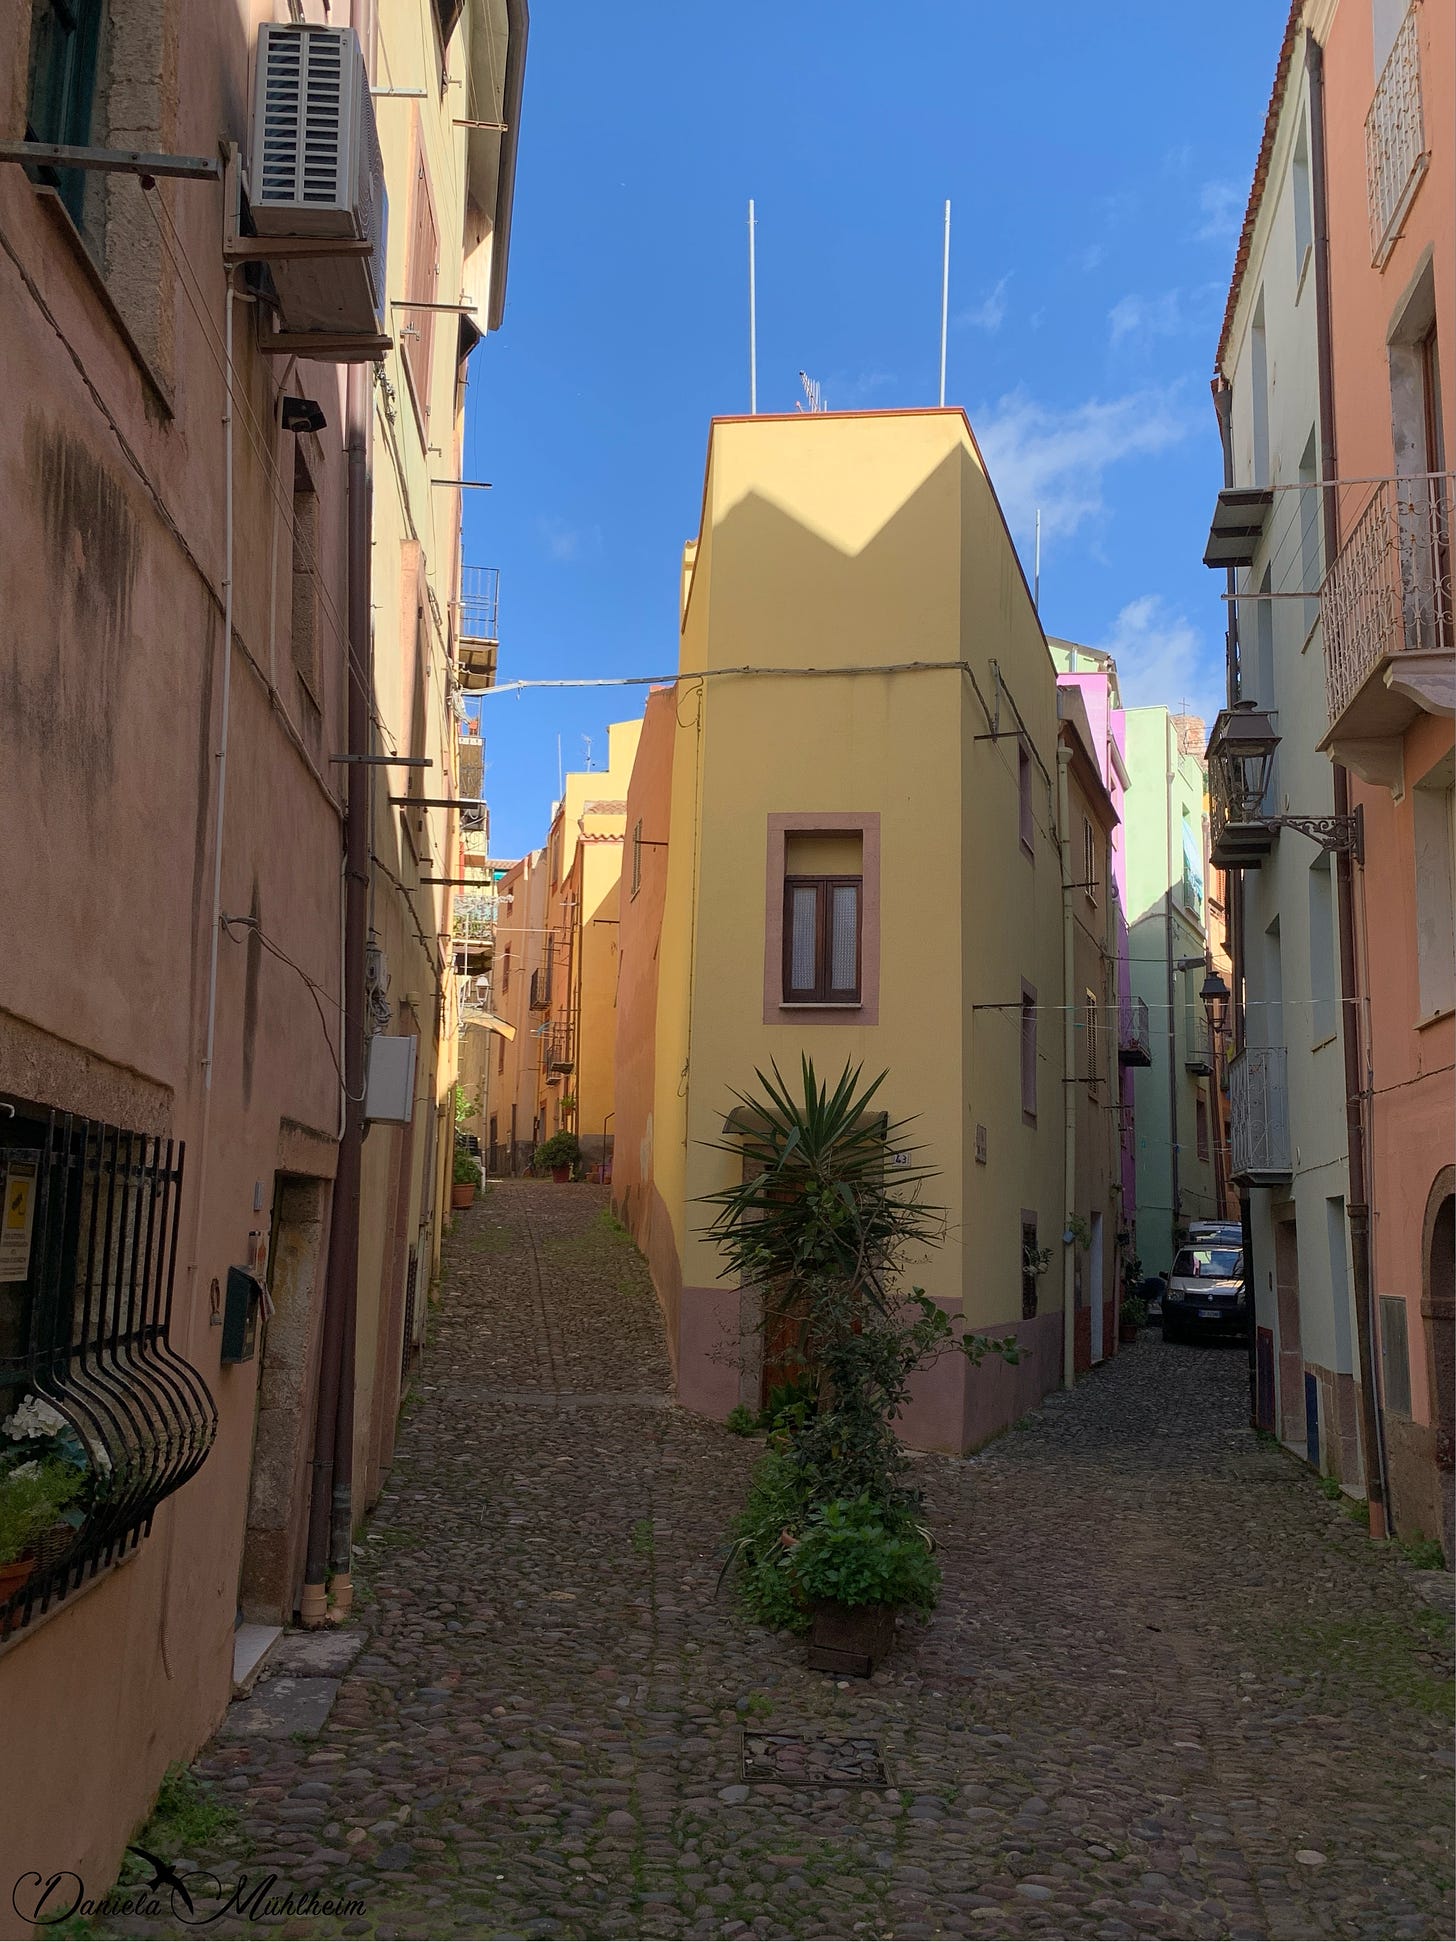 narrow and colourful streets in an italian town, a car can be seen in one of the two streets